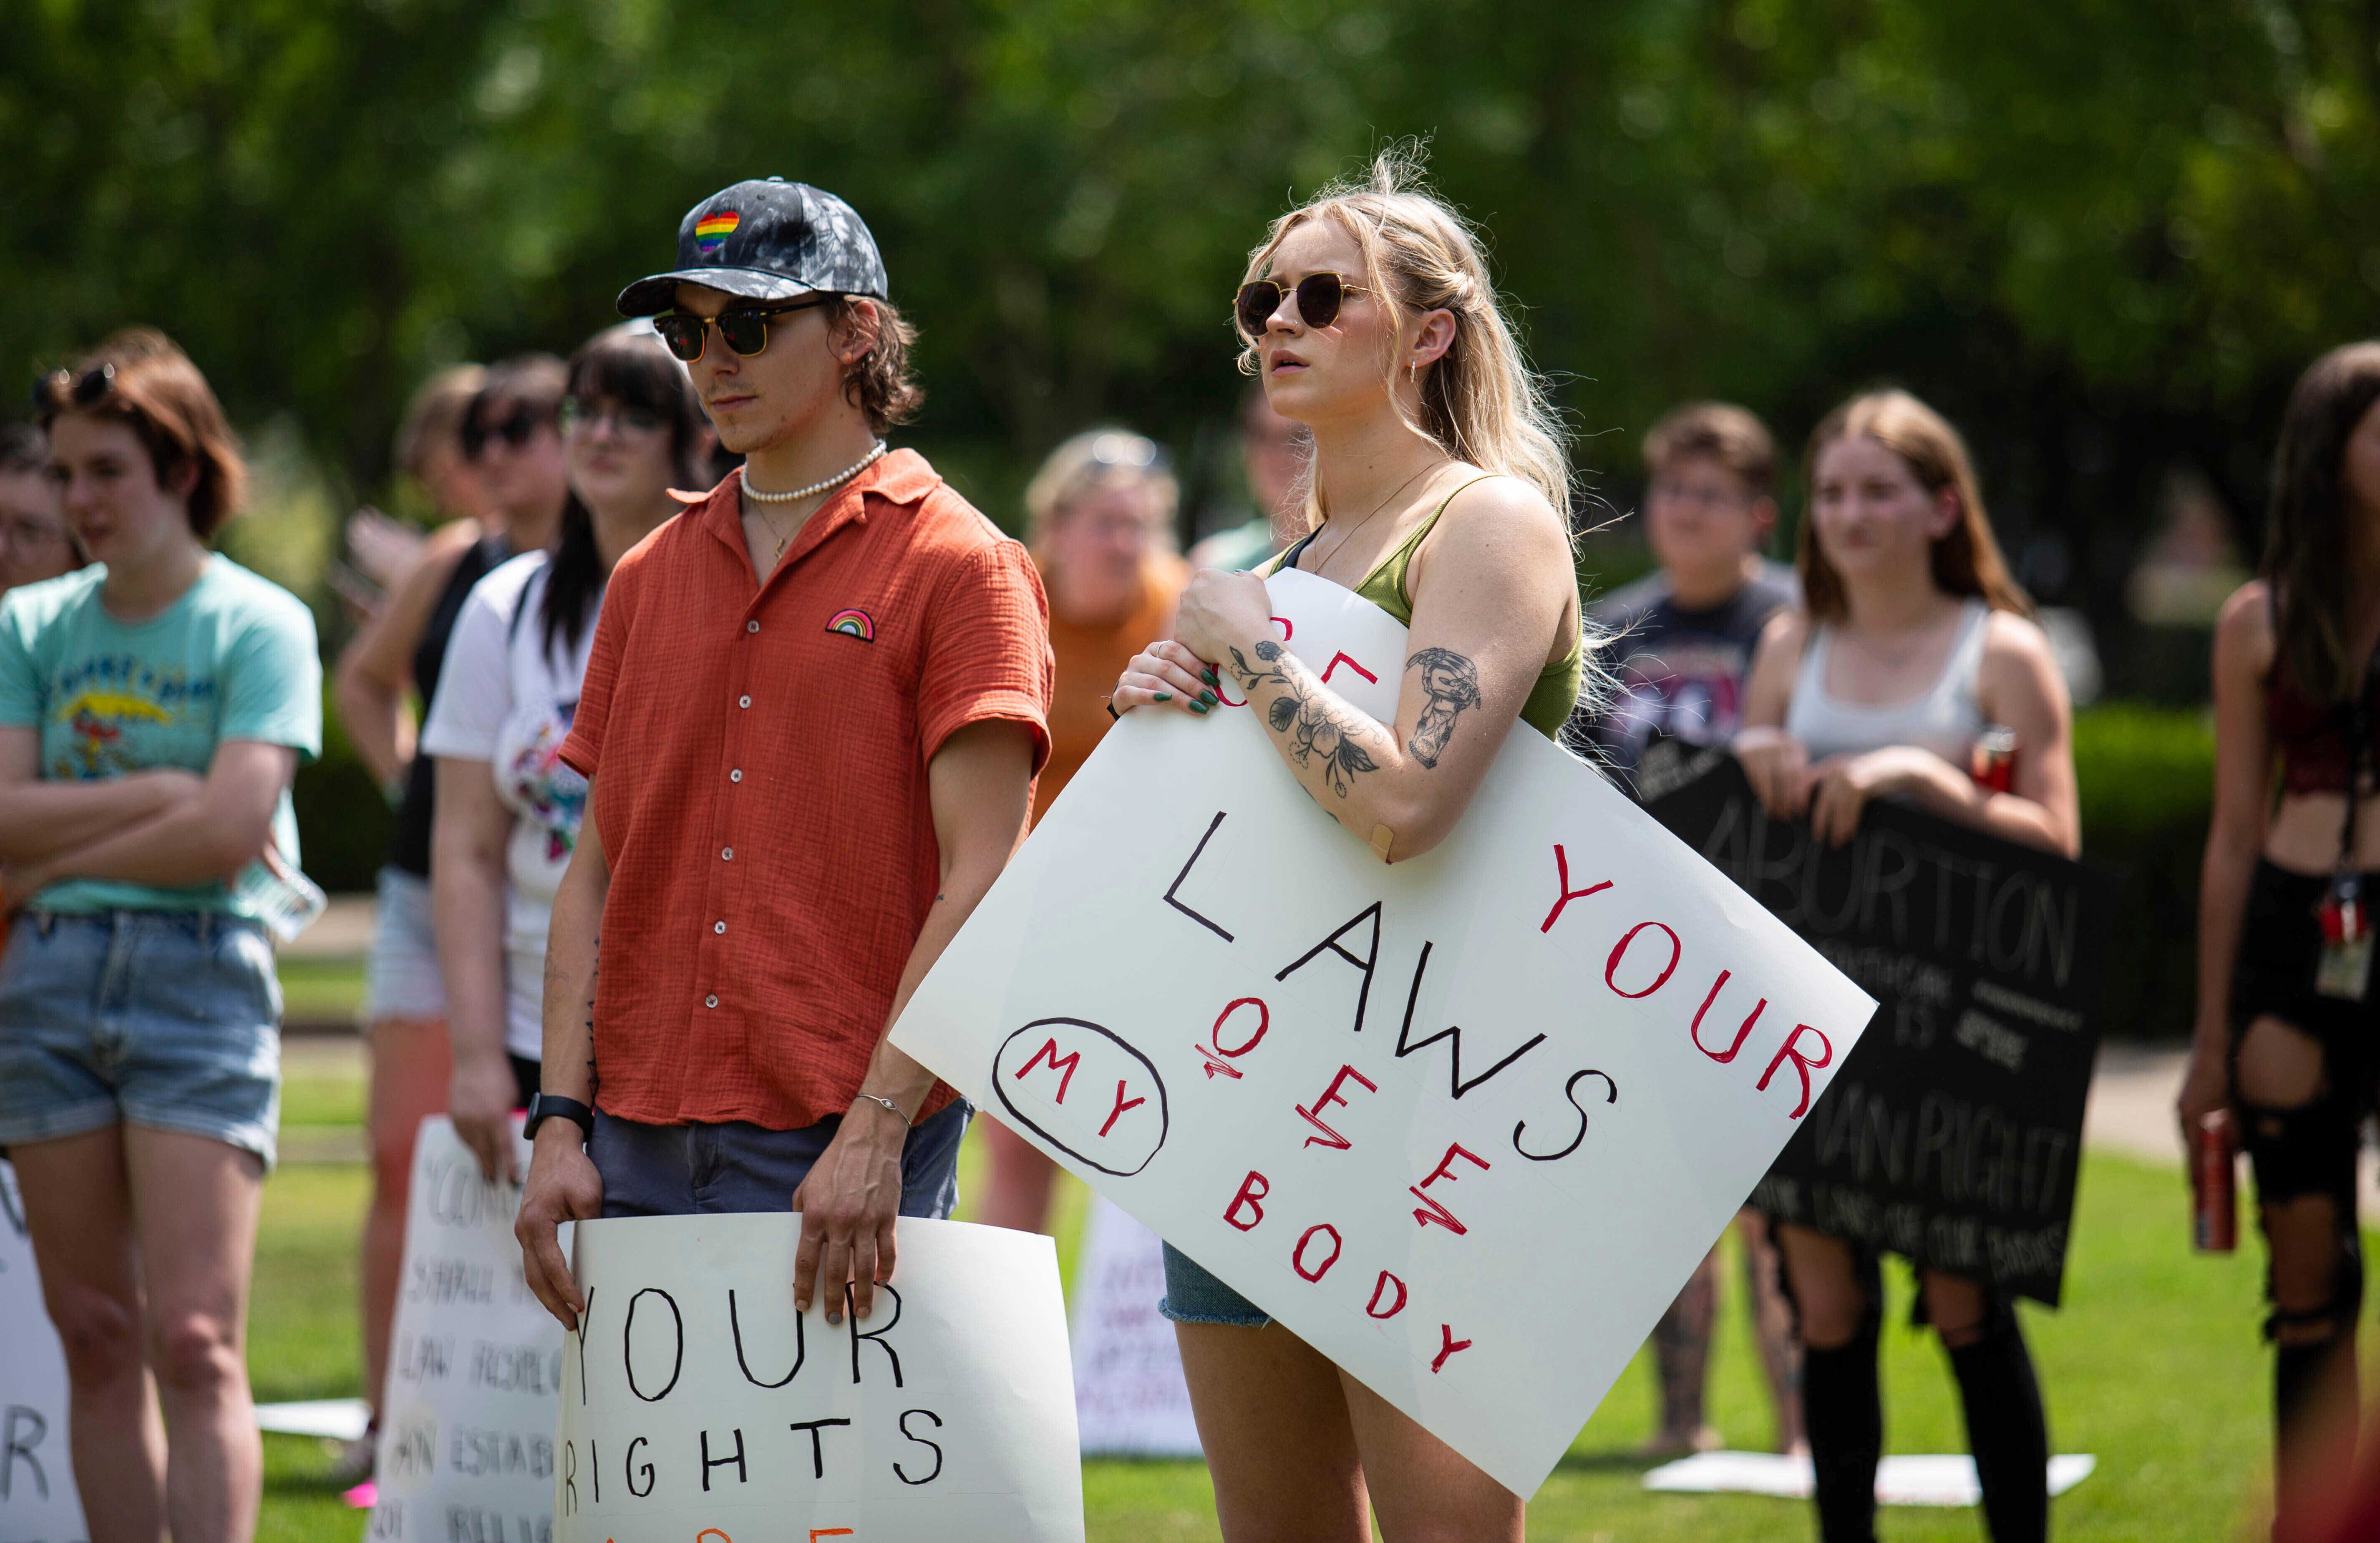 Community members gather to protest the U.S. Supreme Court's overturning of Roe v. Wade and Kentucky's trigger law to ban abortion, at Circus Square Park in Bowling Green, Ky., on Saturday, June 25, 2022. (Grace Ramey/Daily News via AP, File)